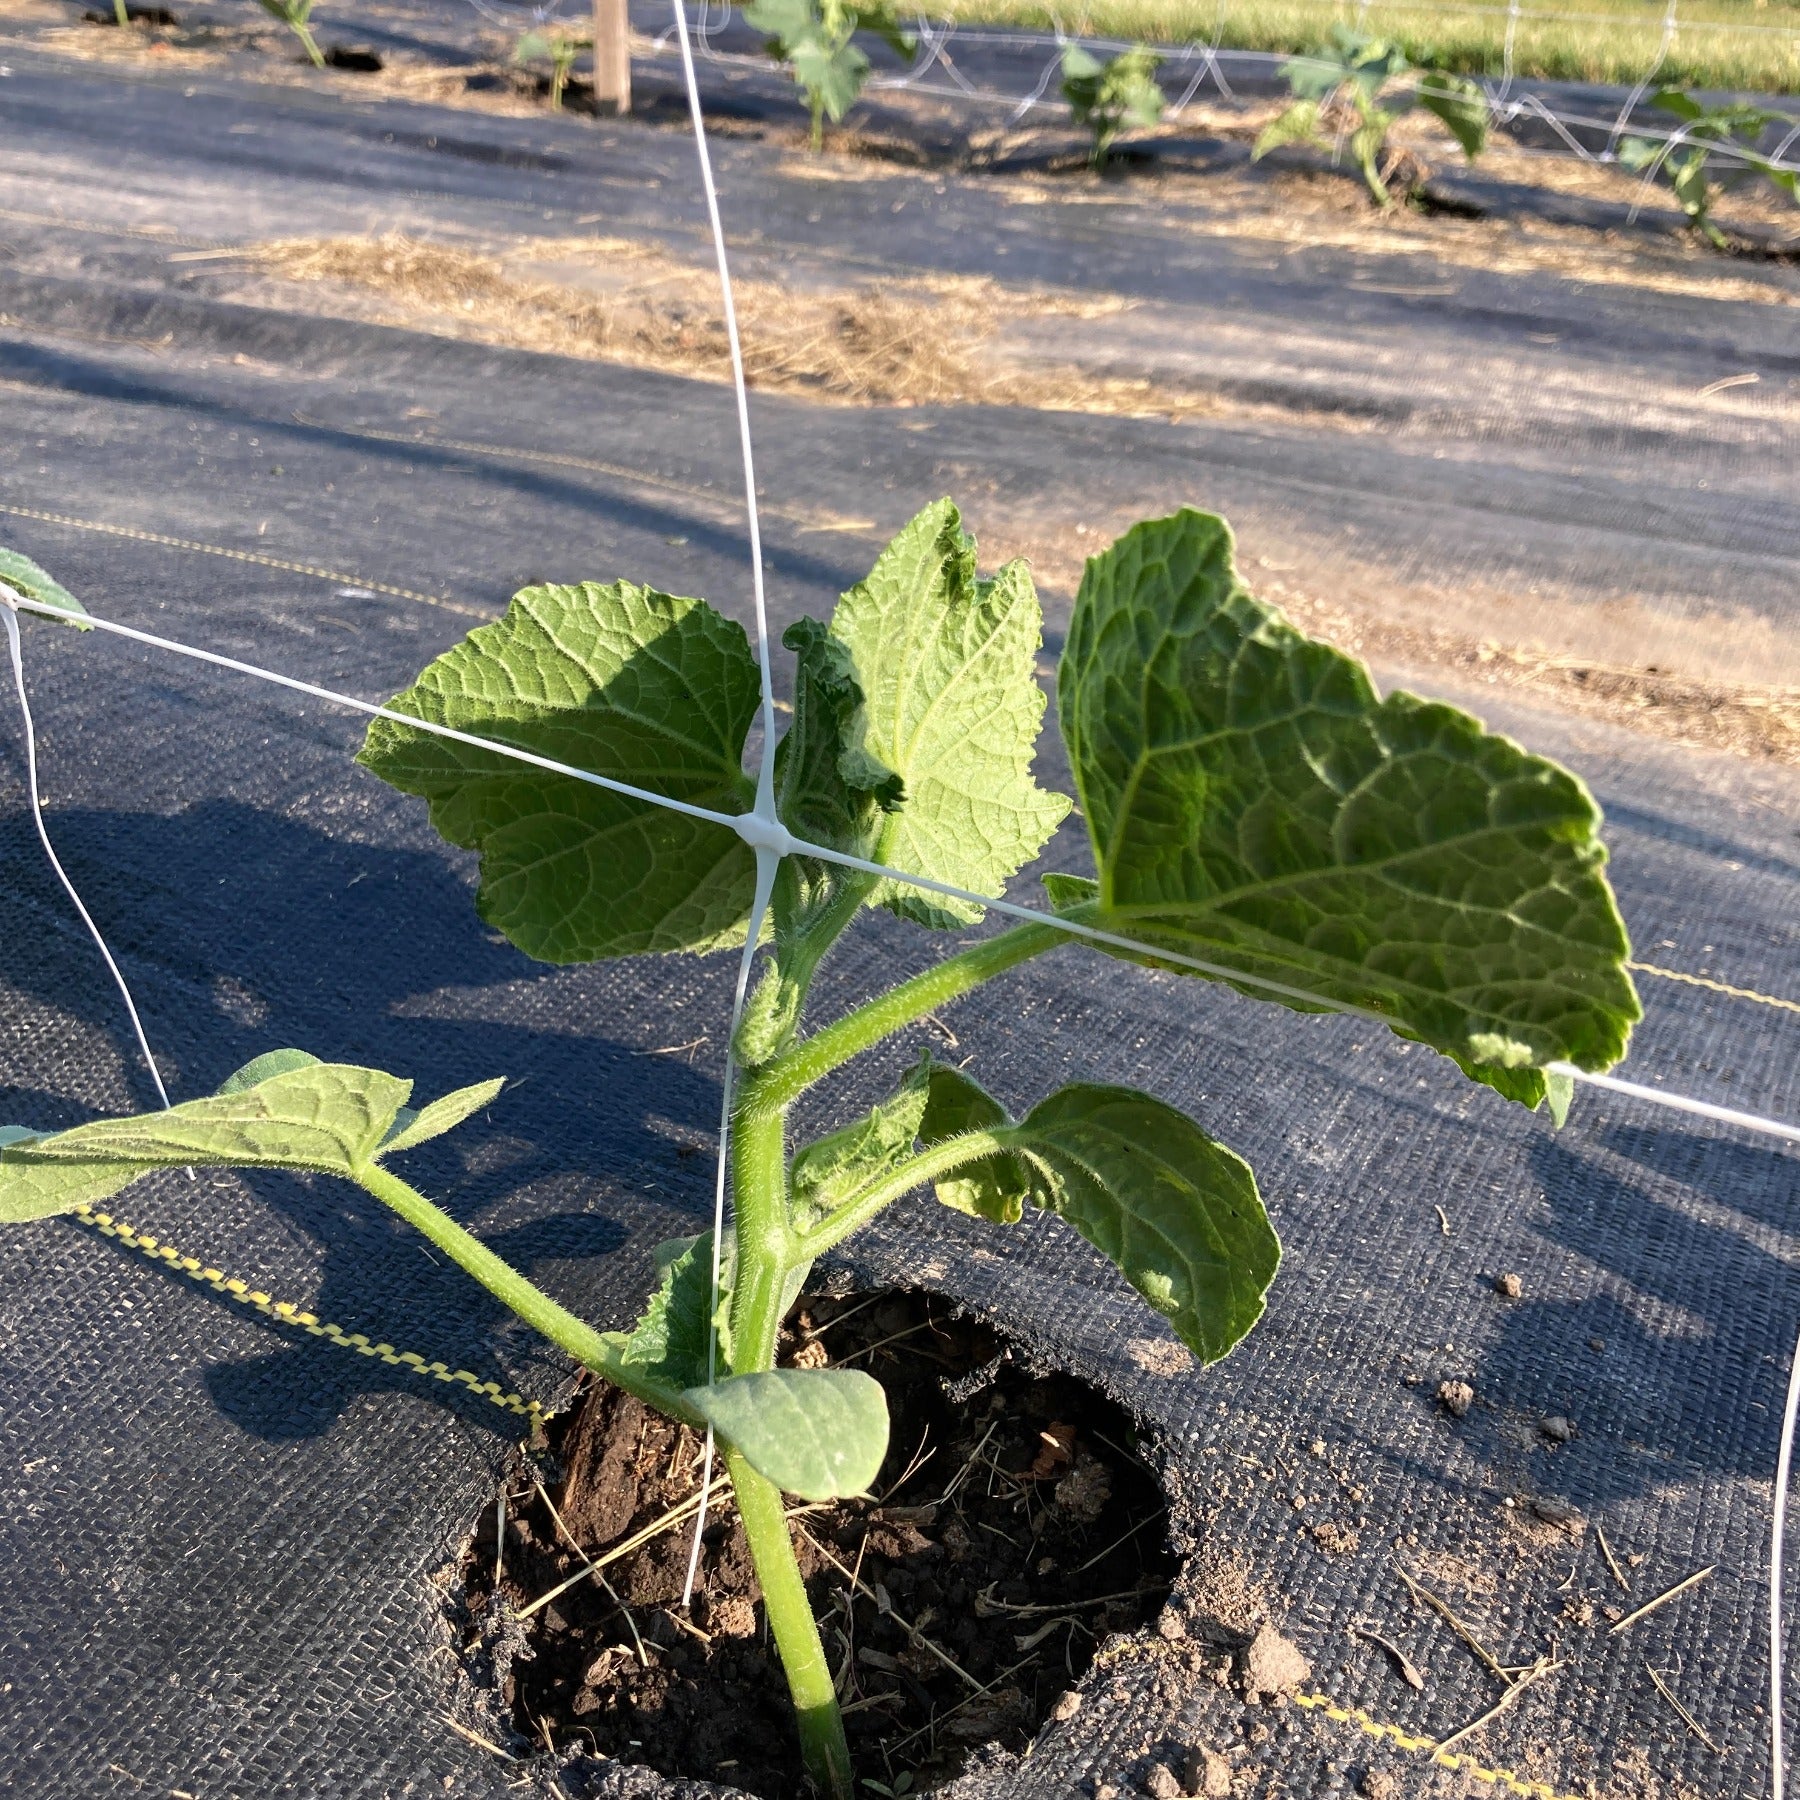 A Poinsette 76 Cucumber Plant at First trellising